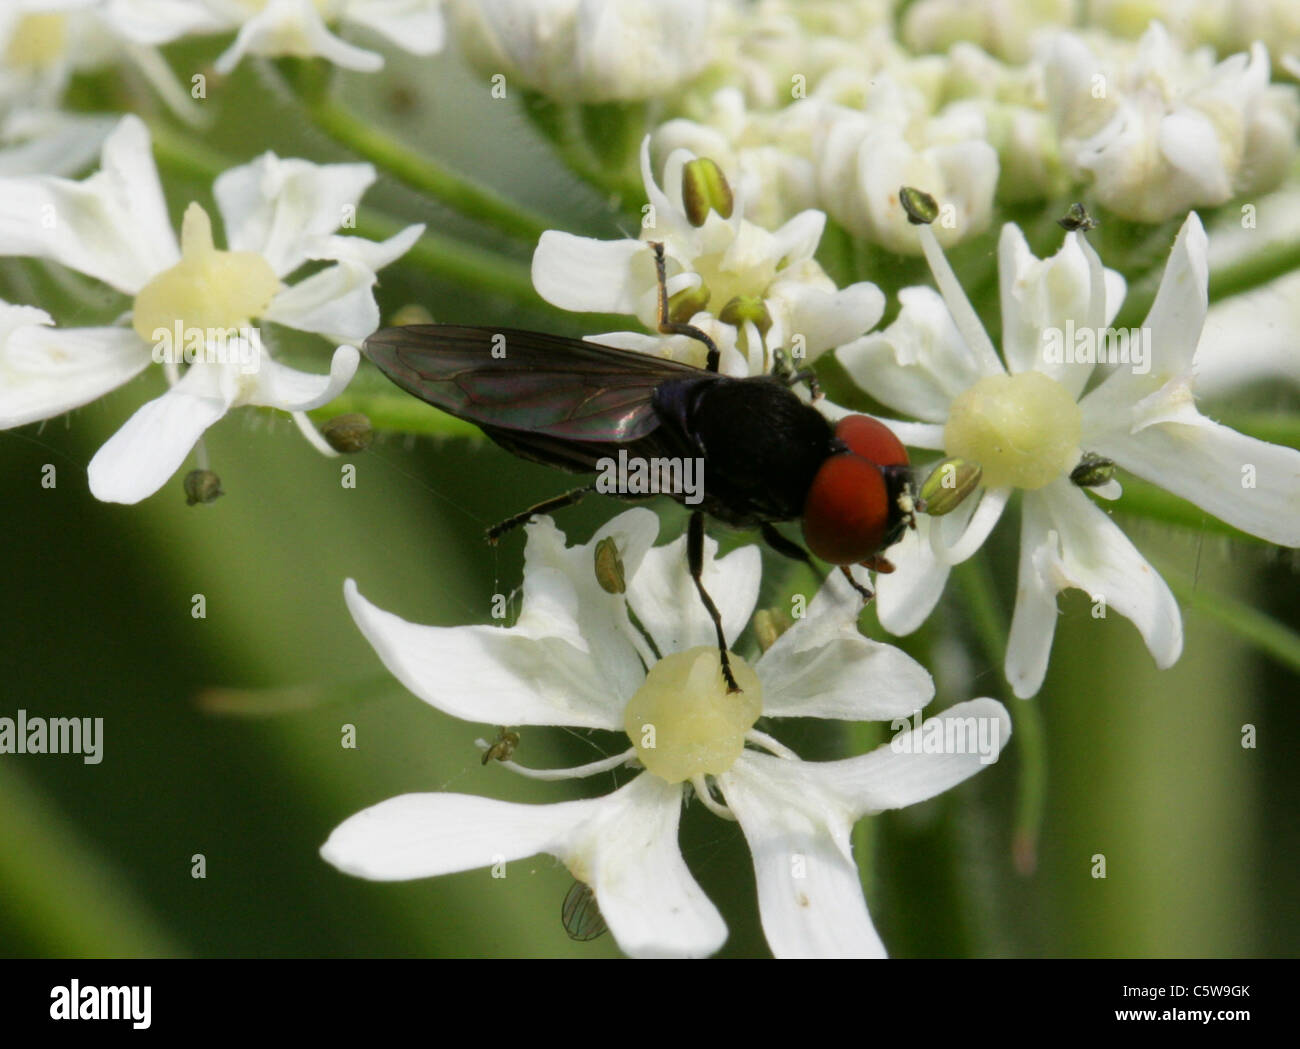 Hoverfly, Chrysogaster solstitialis, Syrphidae, Diptera. Male. Stock Photo